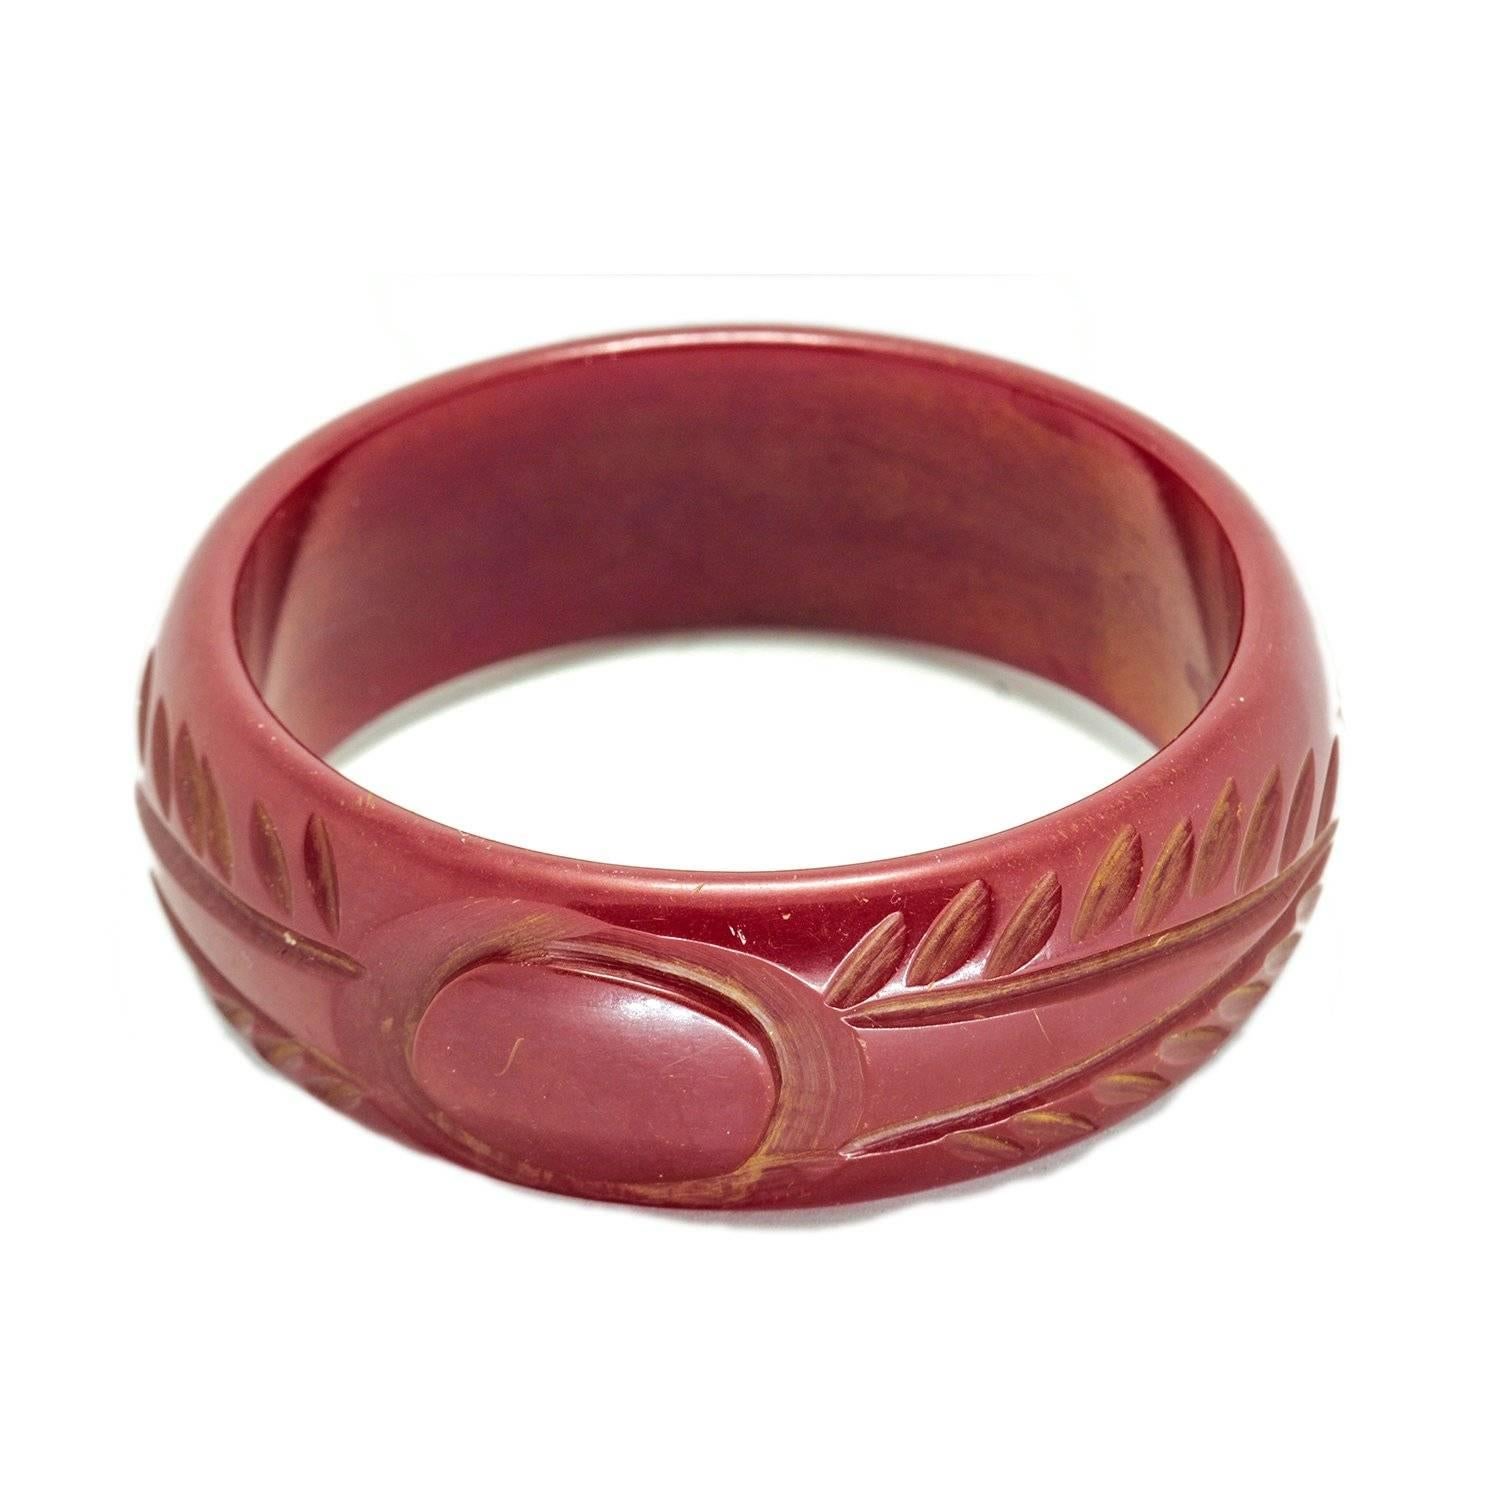 Art Deco Deep Cherry Red Hand Carved Bakelite Bangle

Stunning Early Bakelite 1920's Bangle, featuring two leaf like carvings either side of a carved out circle. Colour is a deep cherry red, almost maroon in colour.

Diameter = 66mm
Width = 23mm